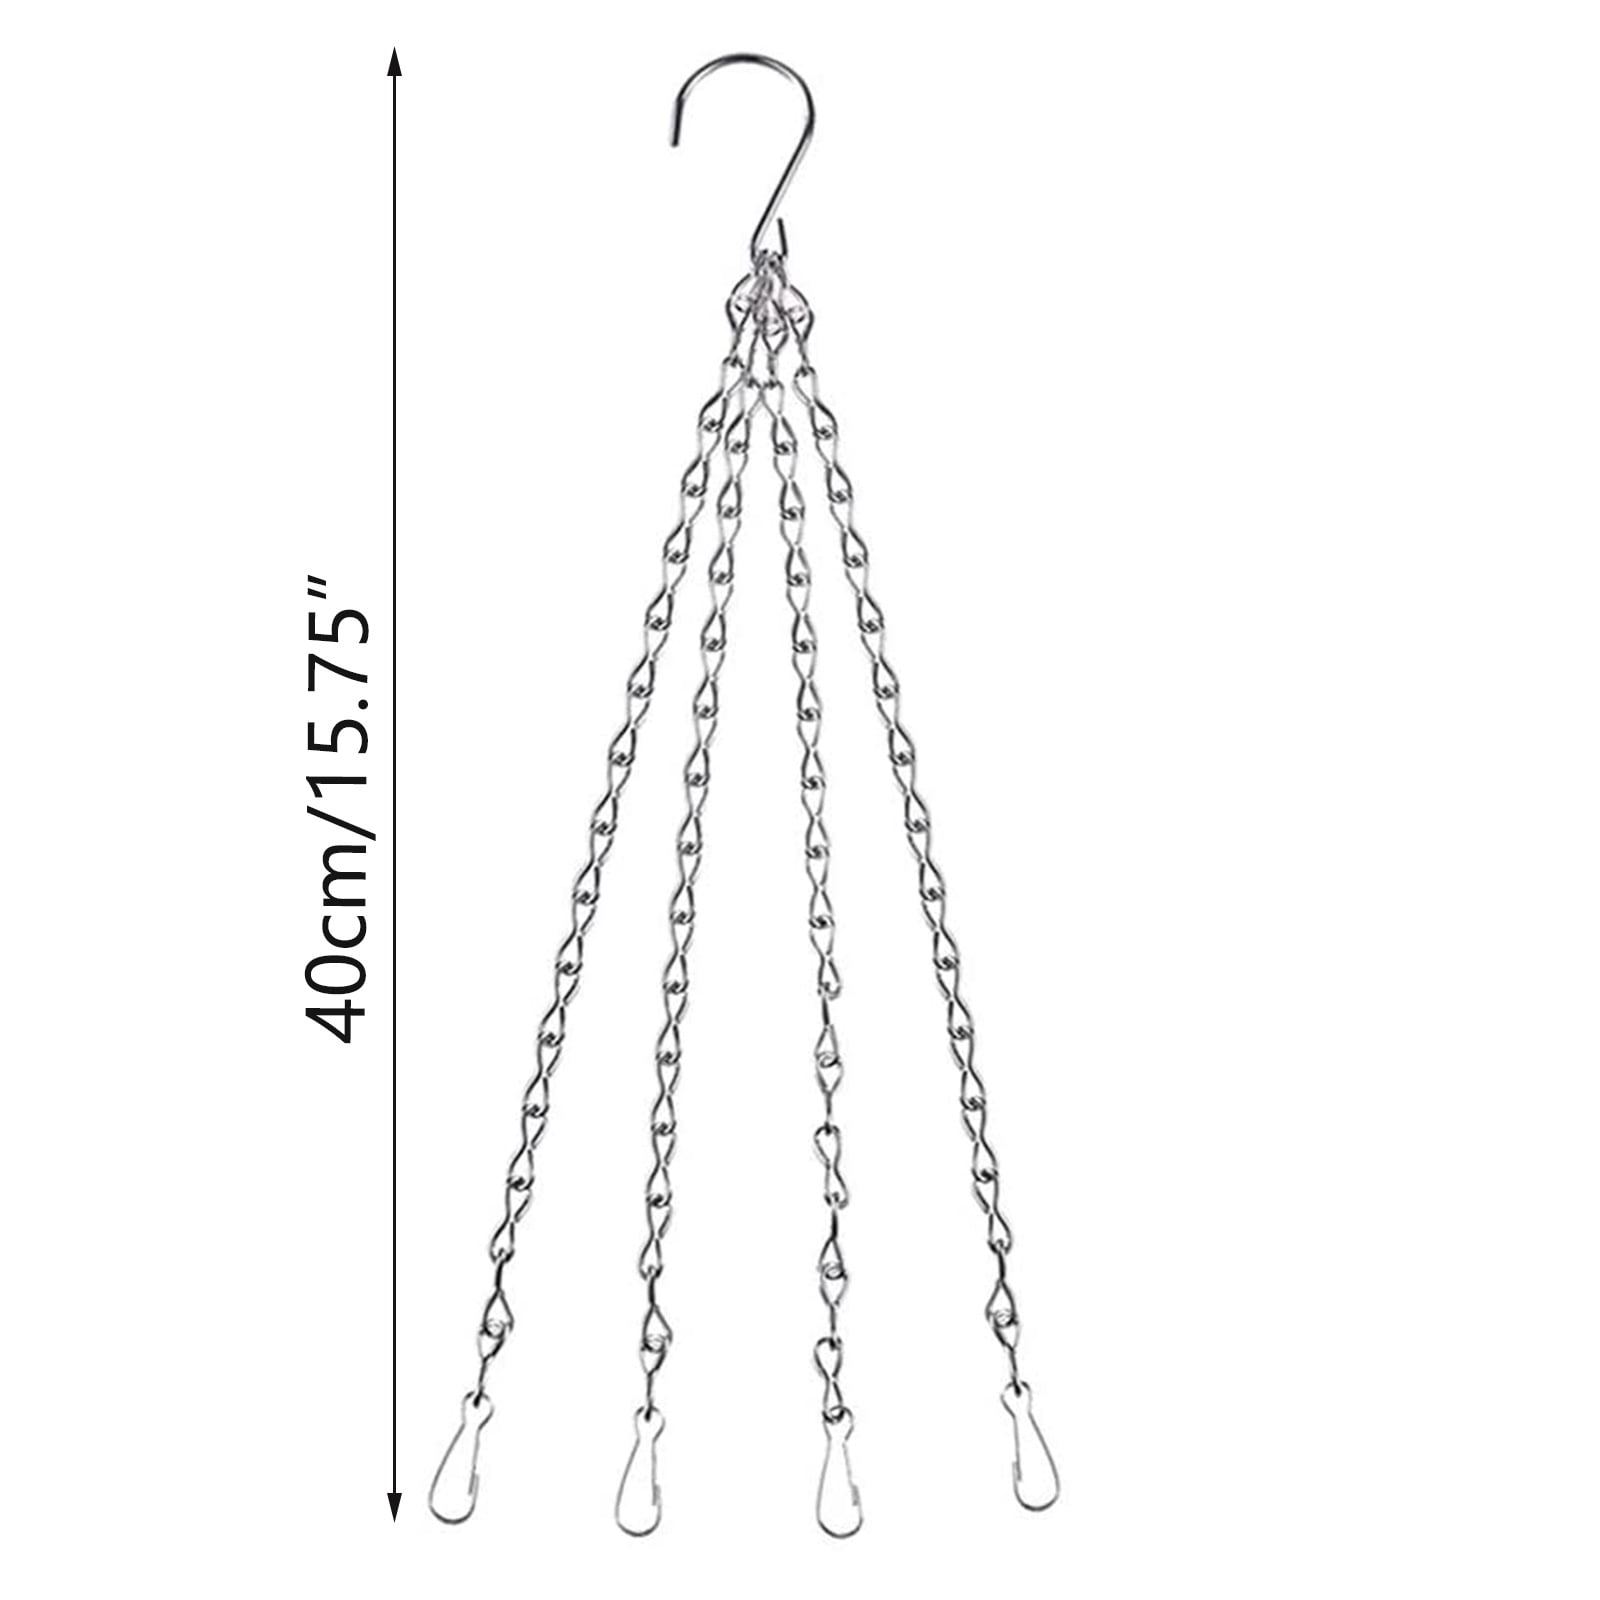 2 x Garden Hanging Basket Spare Metal Chains Easy Fit Replacement Silver Hanger 